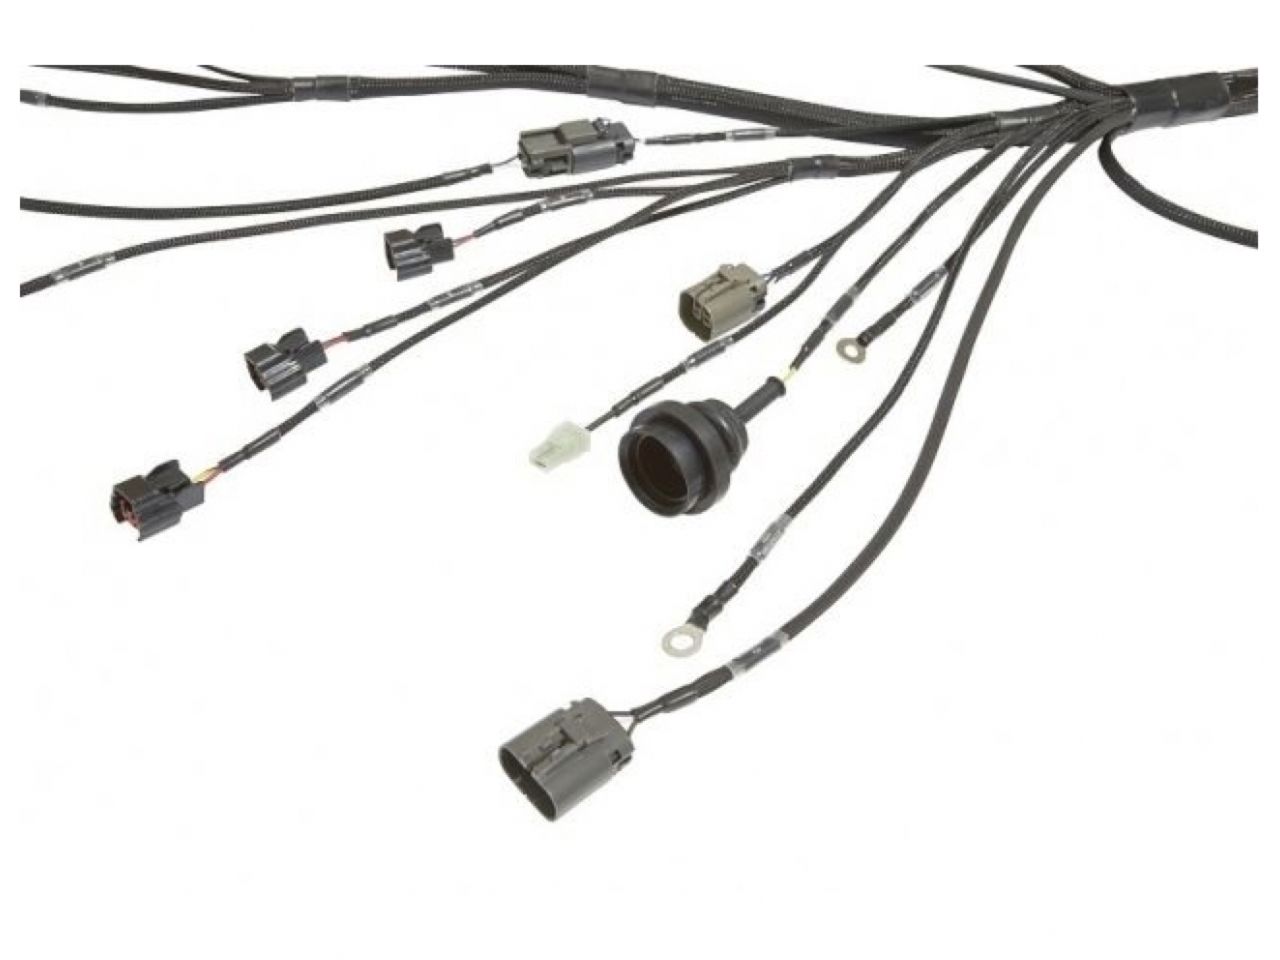 Wiring Specialties S13 SR20DET Wiring Harness for Datsun&#039;s - PRO SERIES